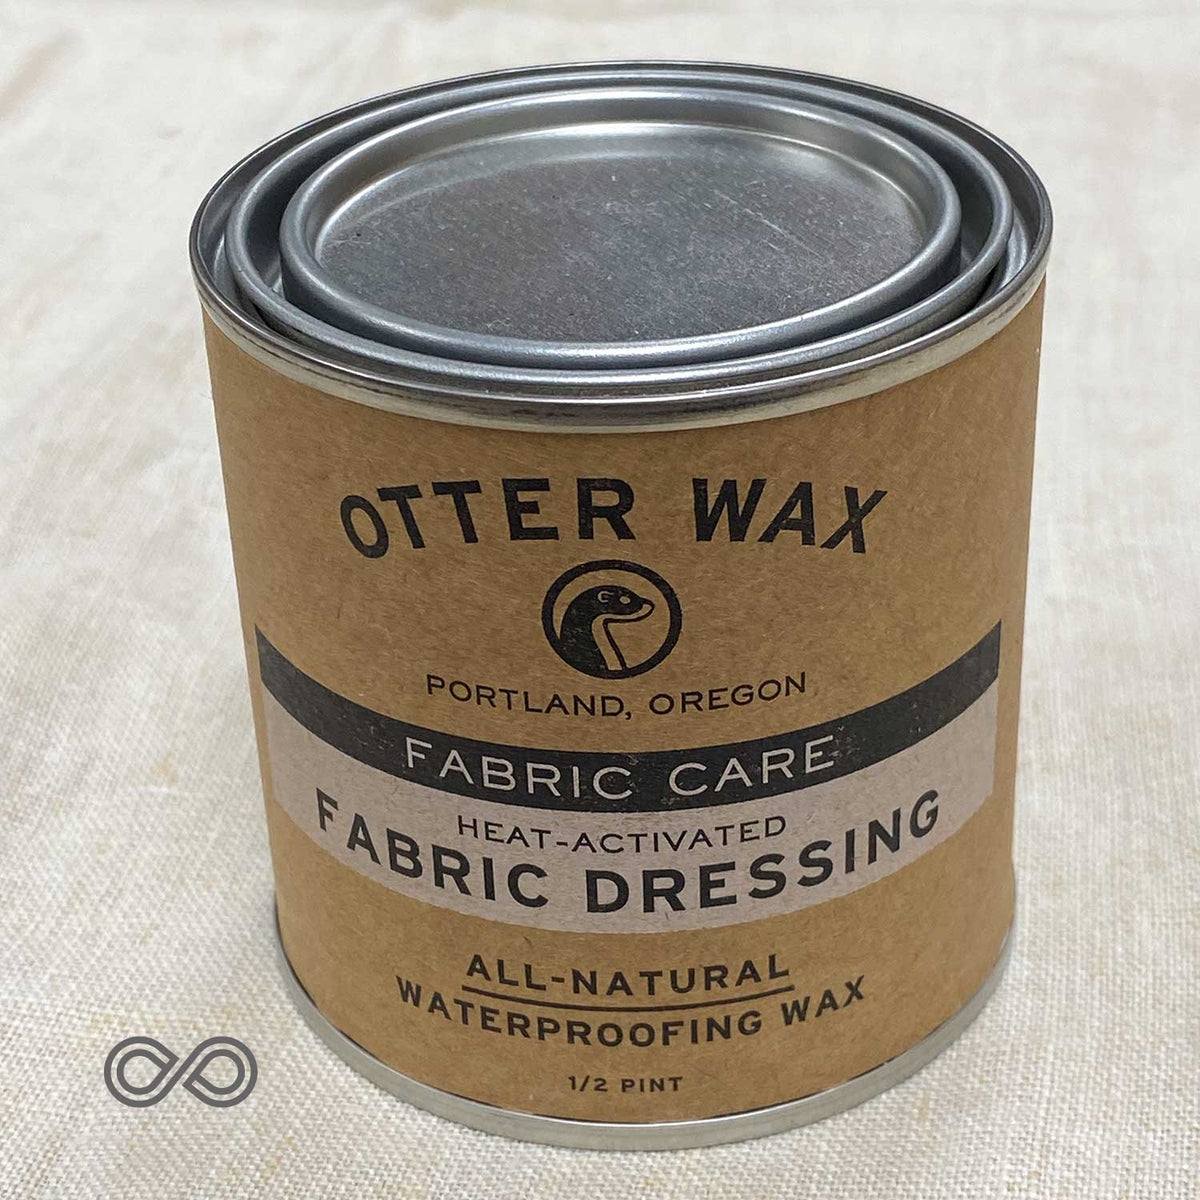 Otter Wax Heat-Activated Fabric Dressing | 1/2 Pint | All-Natural Water  Repellent | Made in USA